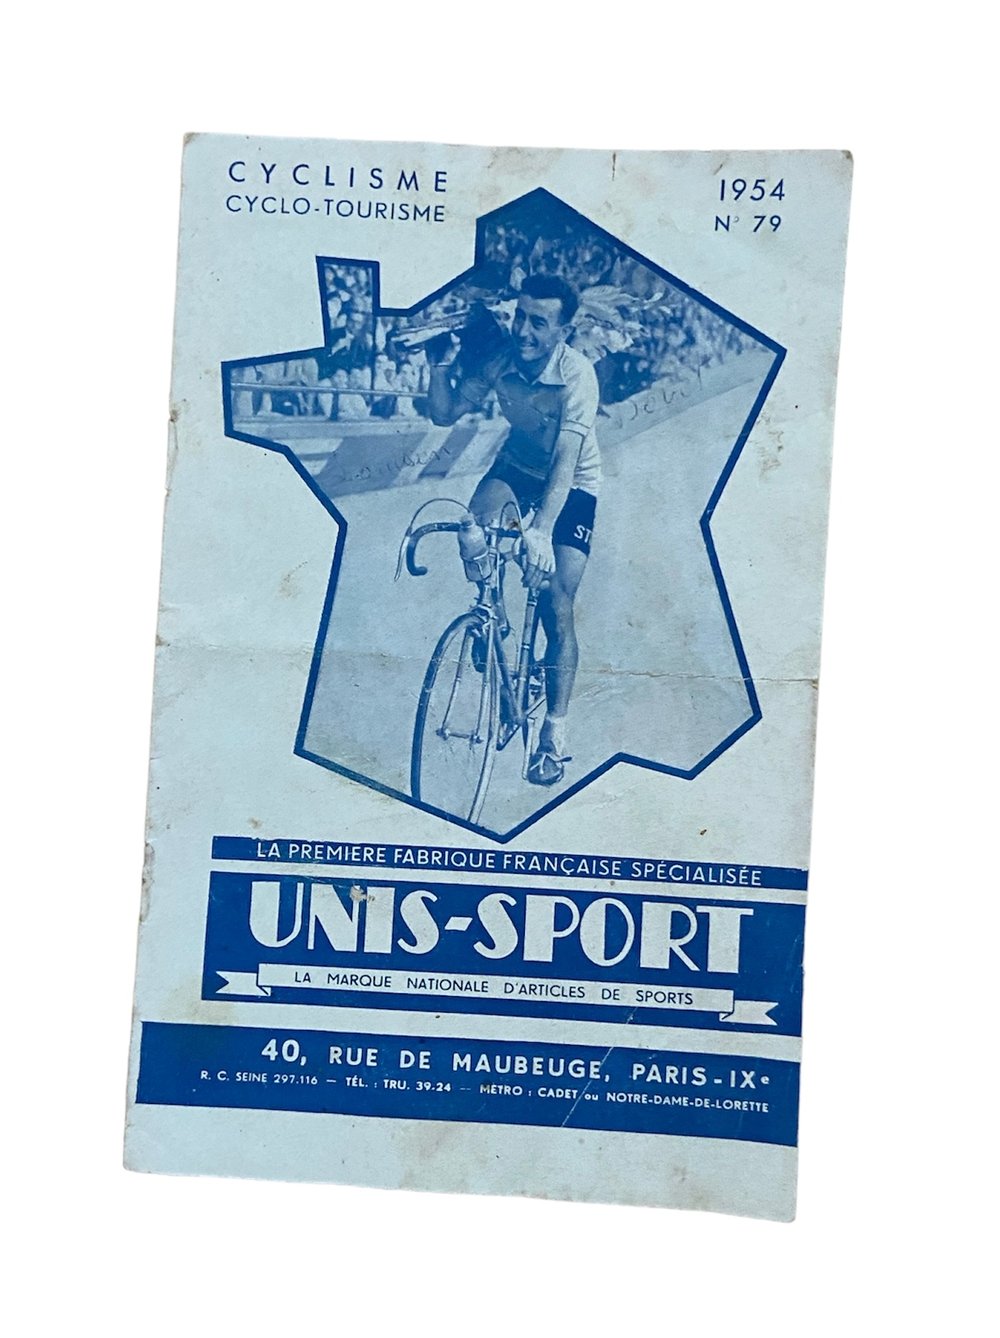 1954 Unis-Sport mail order catalogue dedicated to the sale of cycling articles